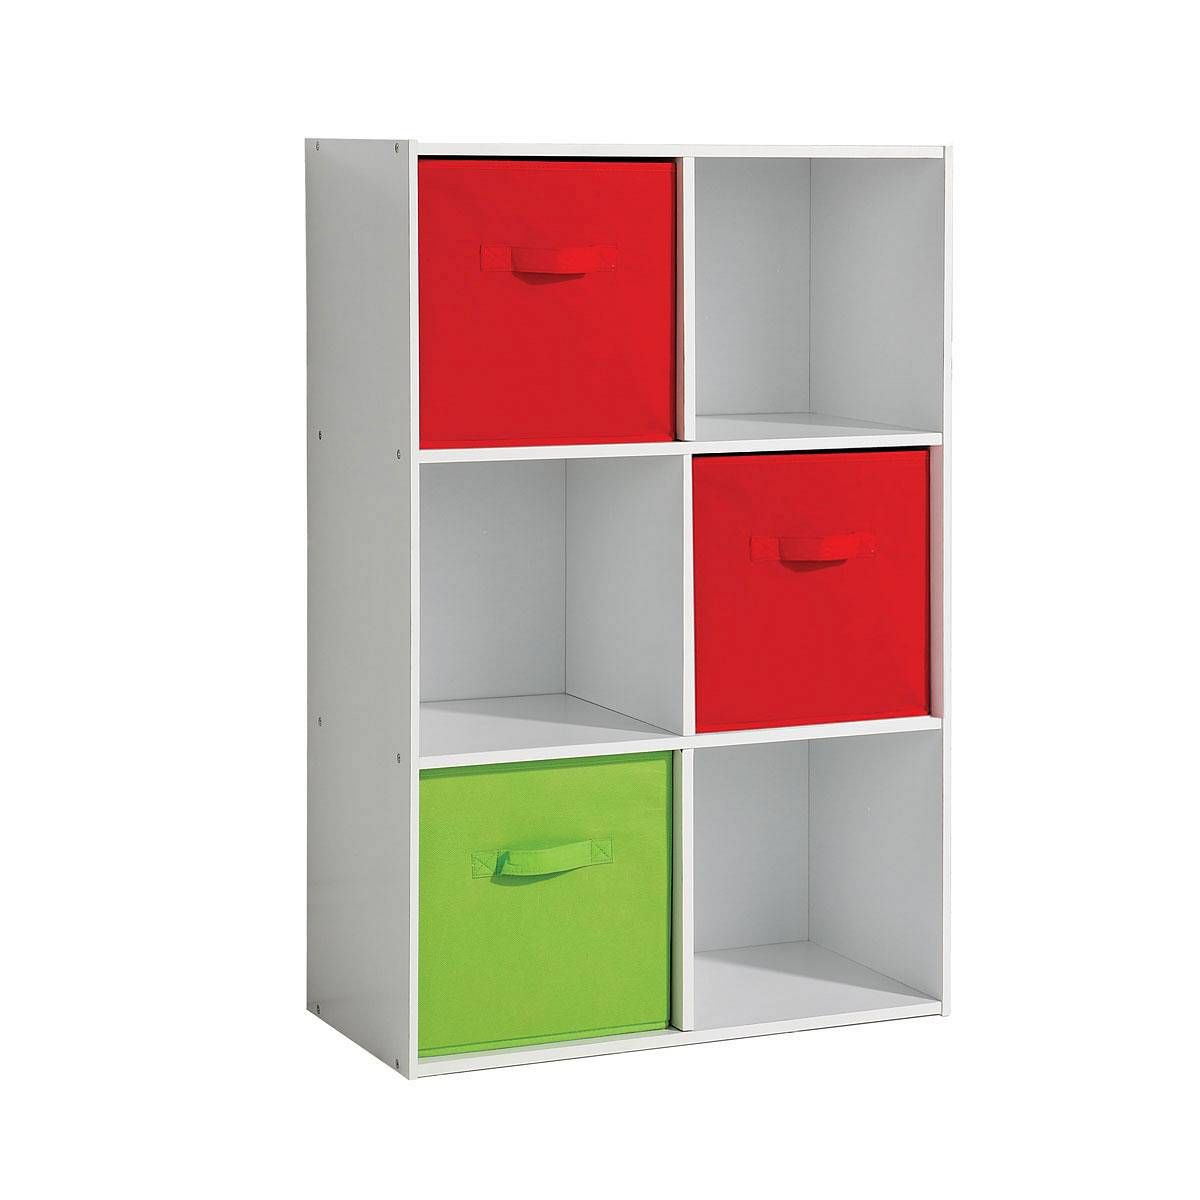 Kids Toys Storage Unit
 Best Storage for Kids Toys that Appealing Archaic